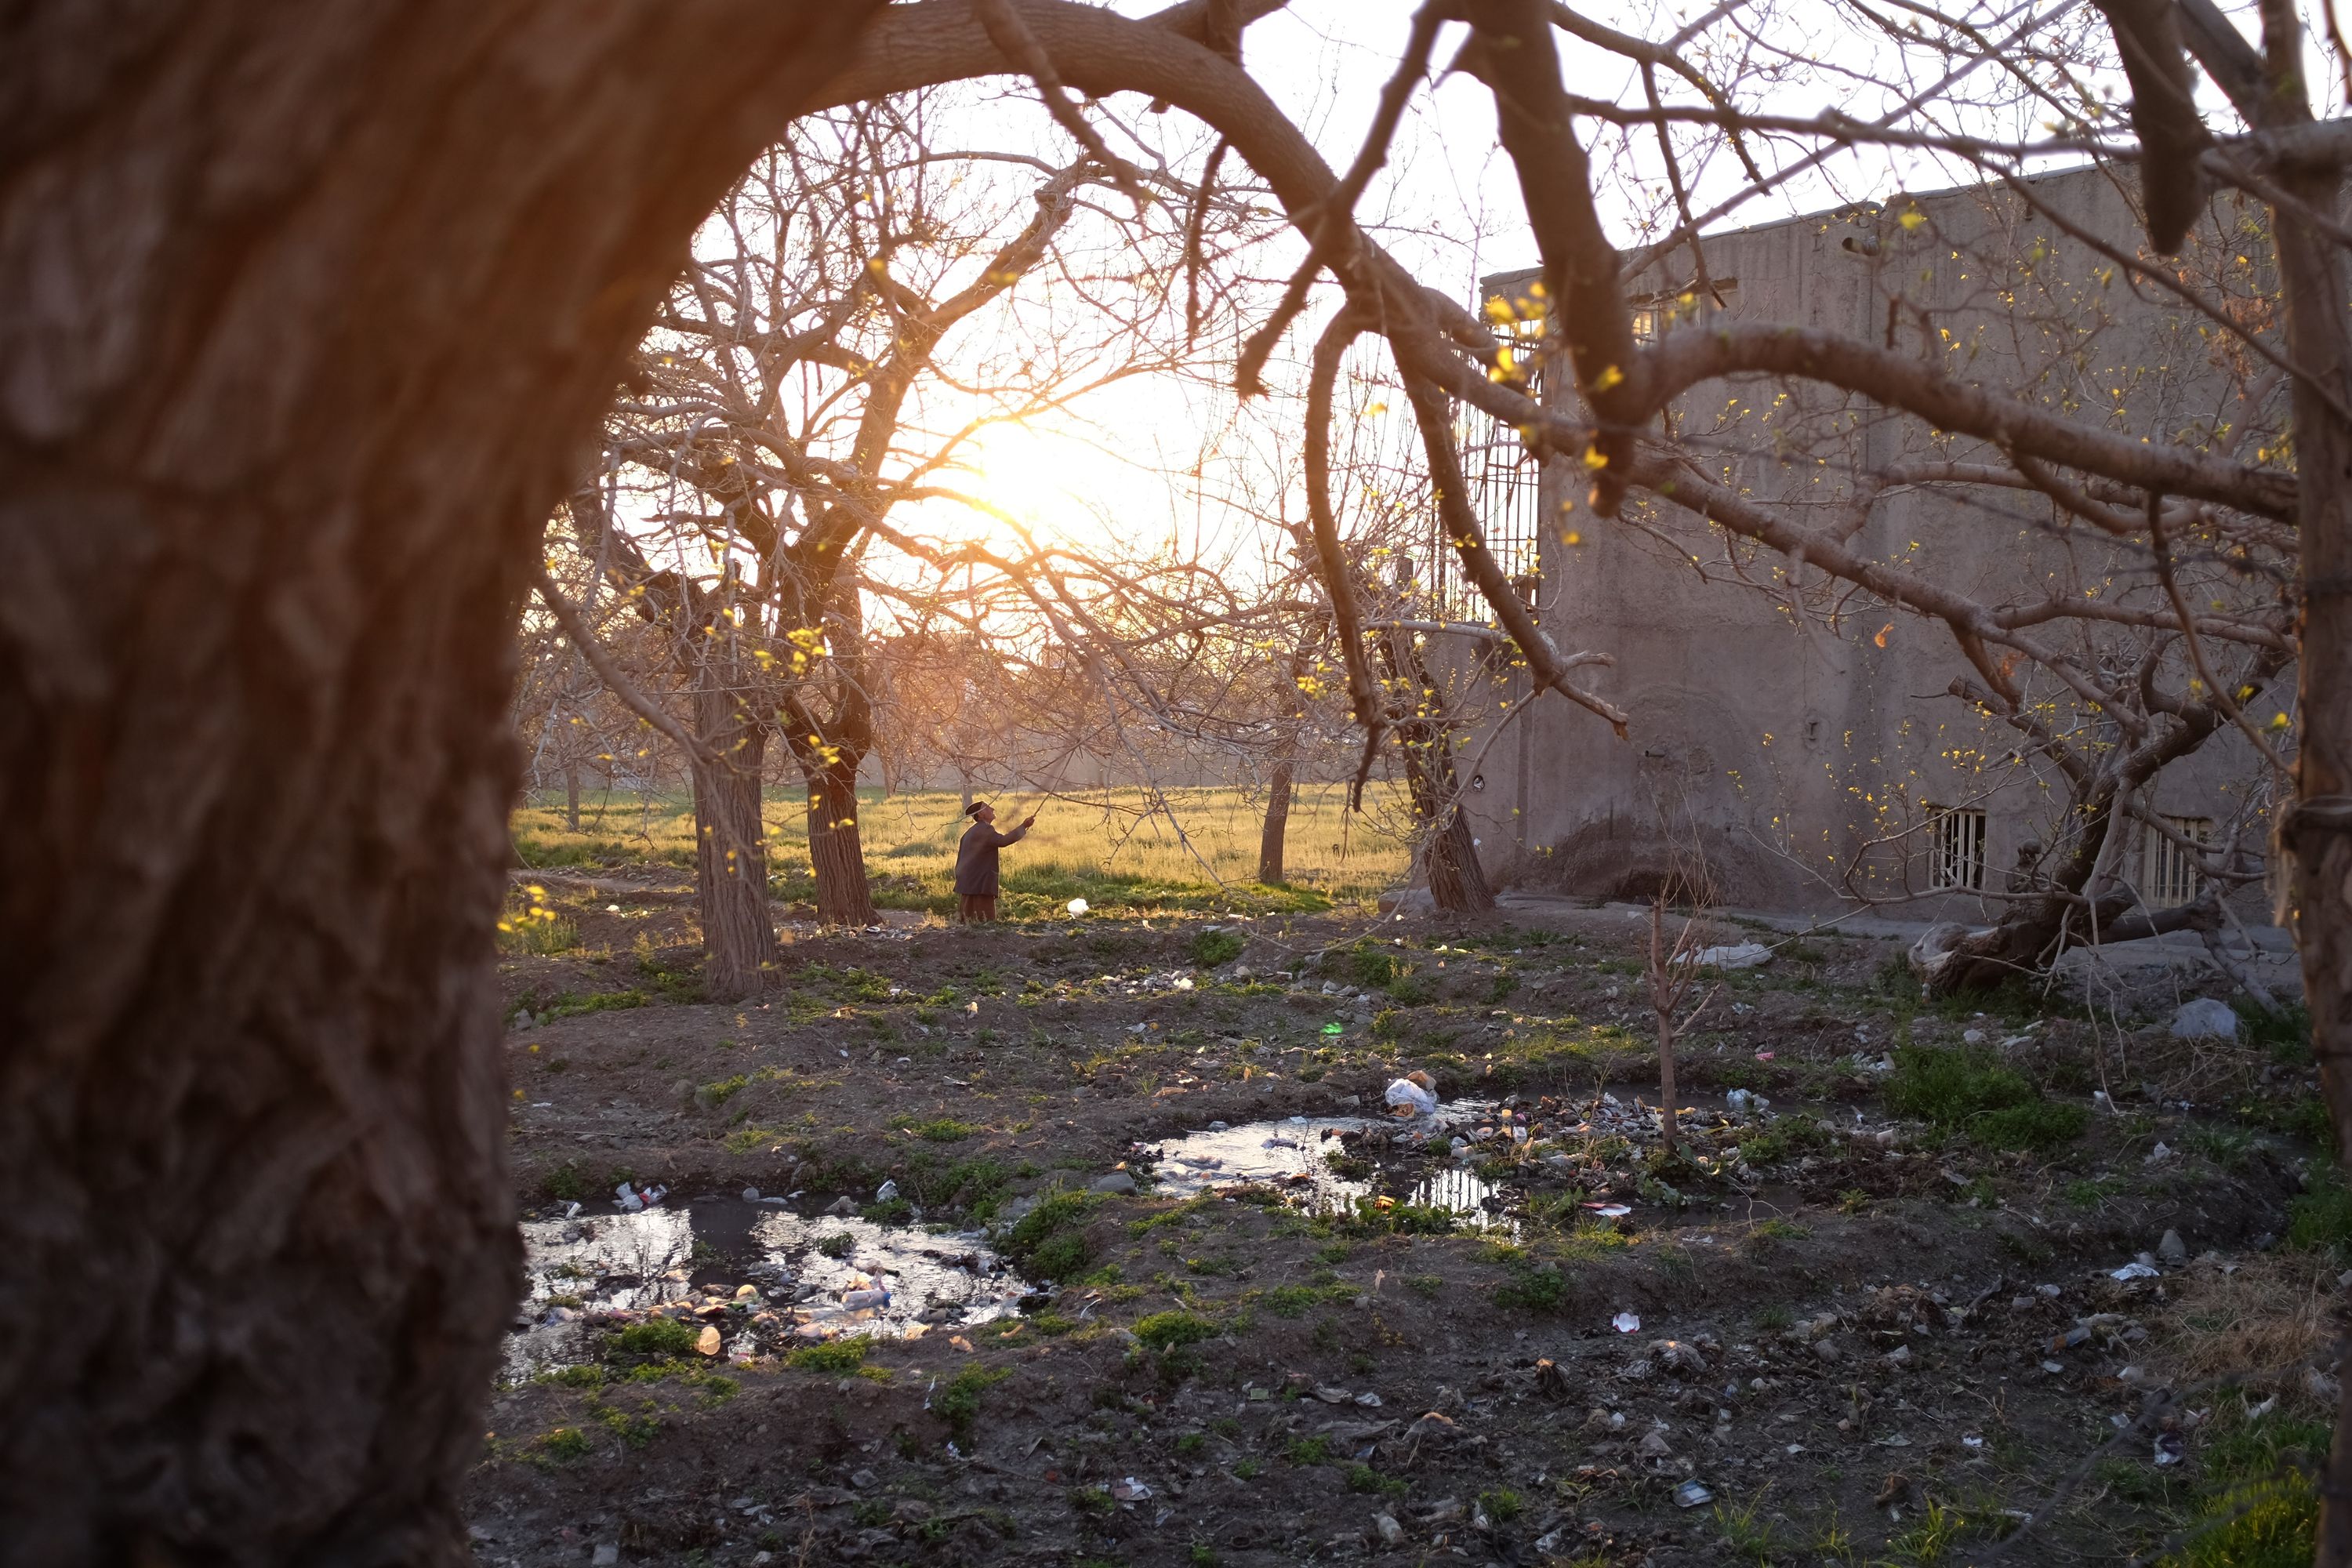 A man in the medium distance inspects one of the trees in a mulberry grove in the evening light.